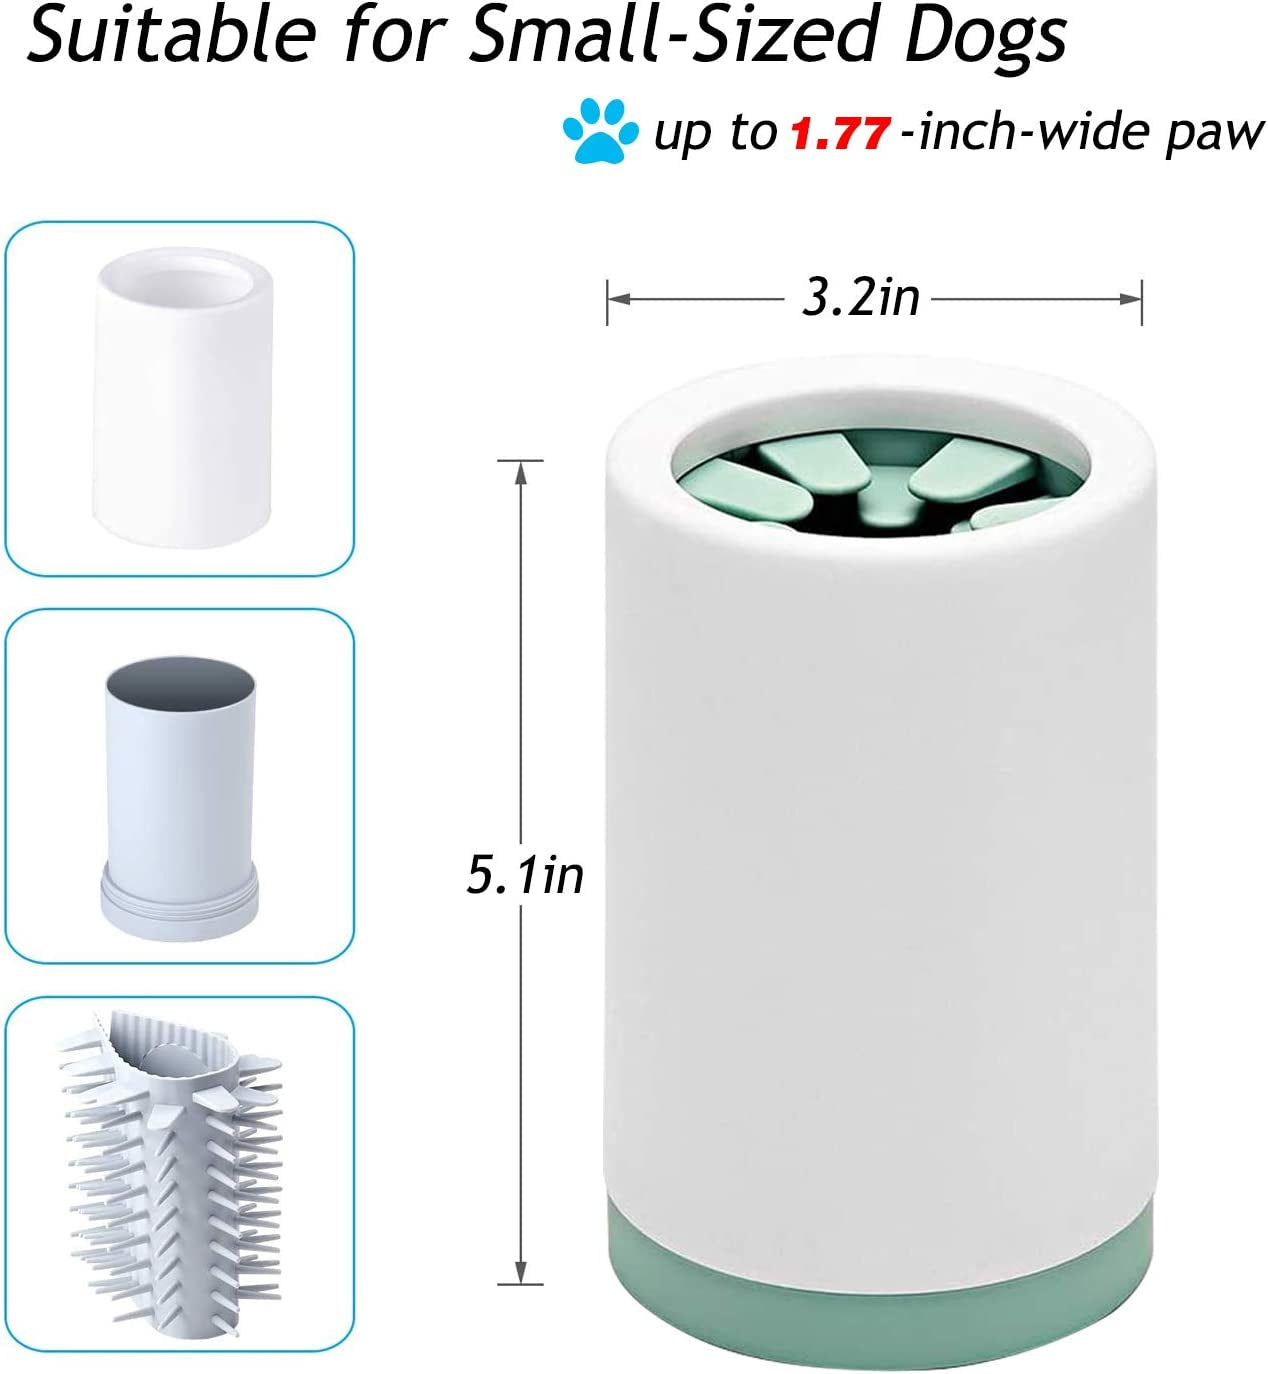 Dog Paw Cleaner - Portable Dog Paw Cleaner Foot Washer Cup for Small Medium Dogs and Cats